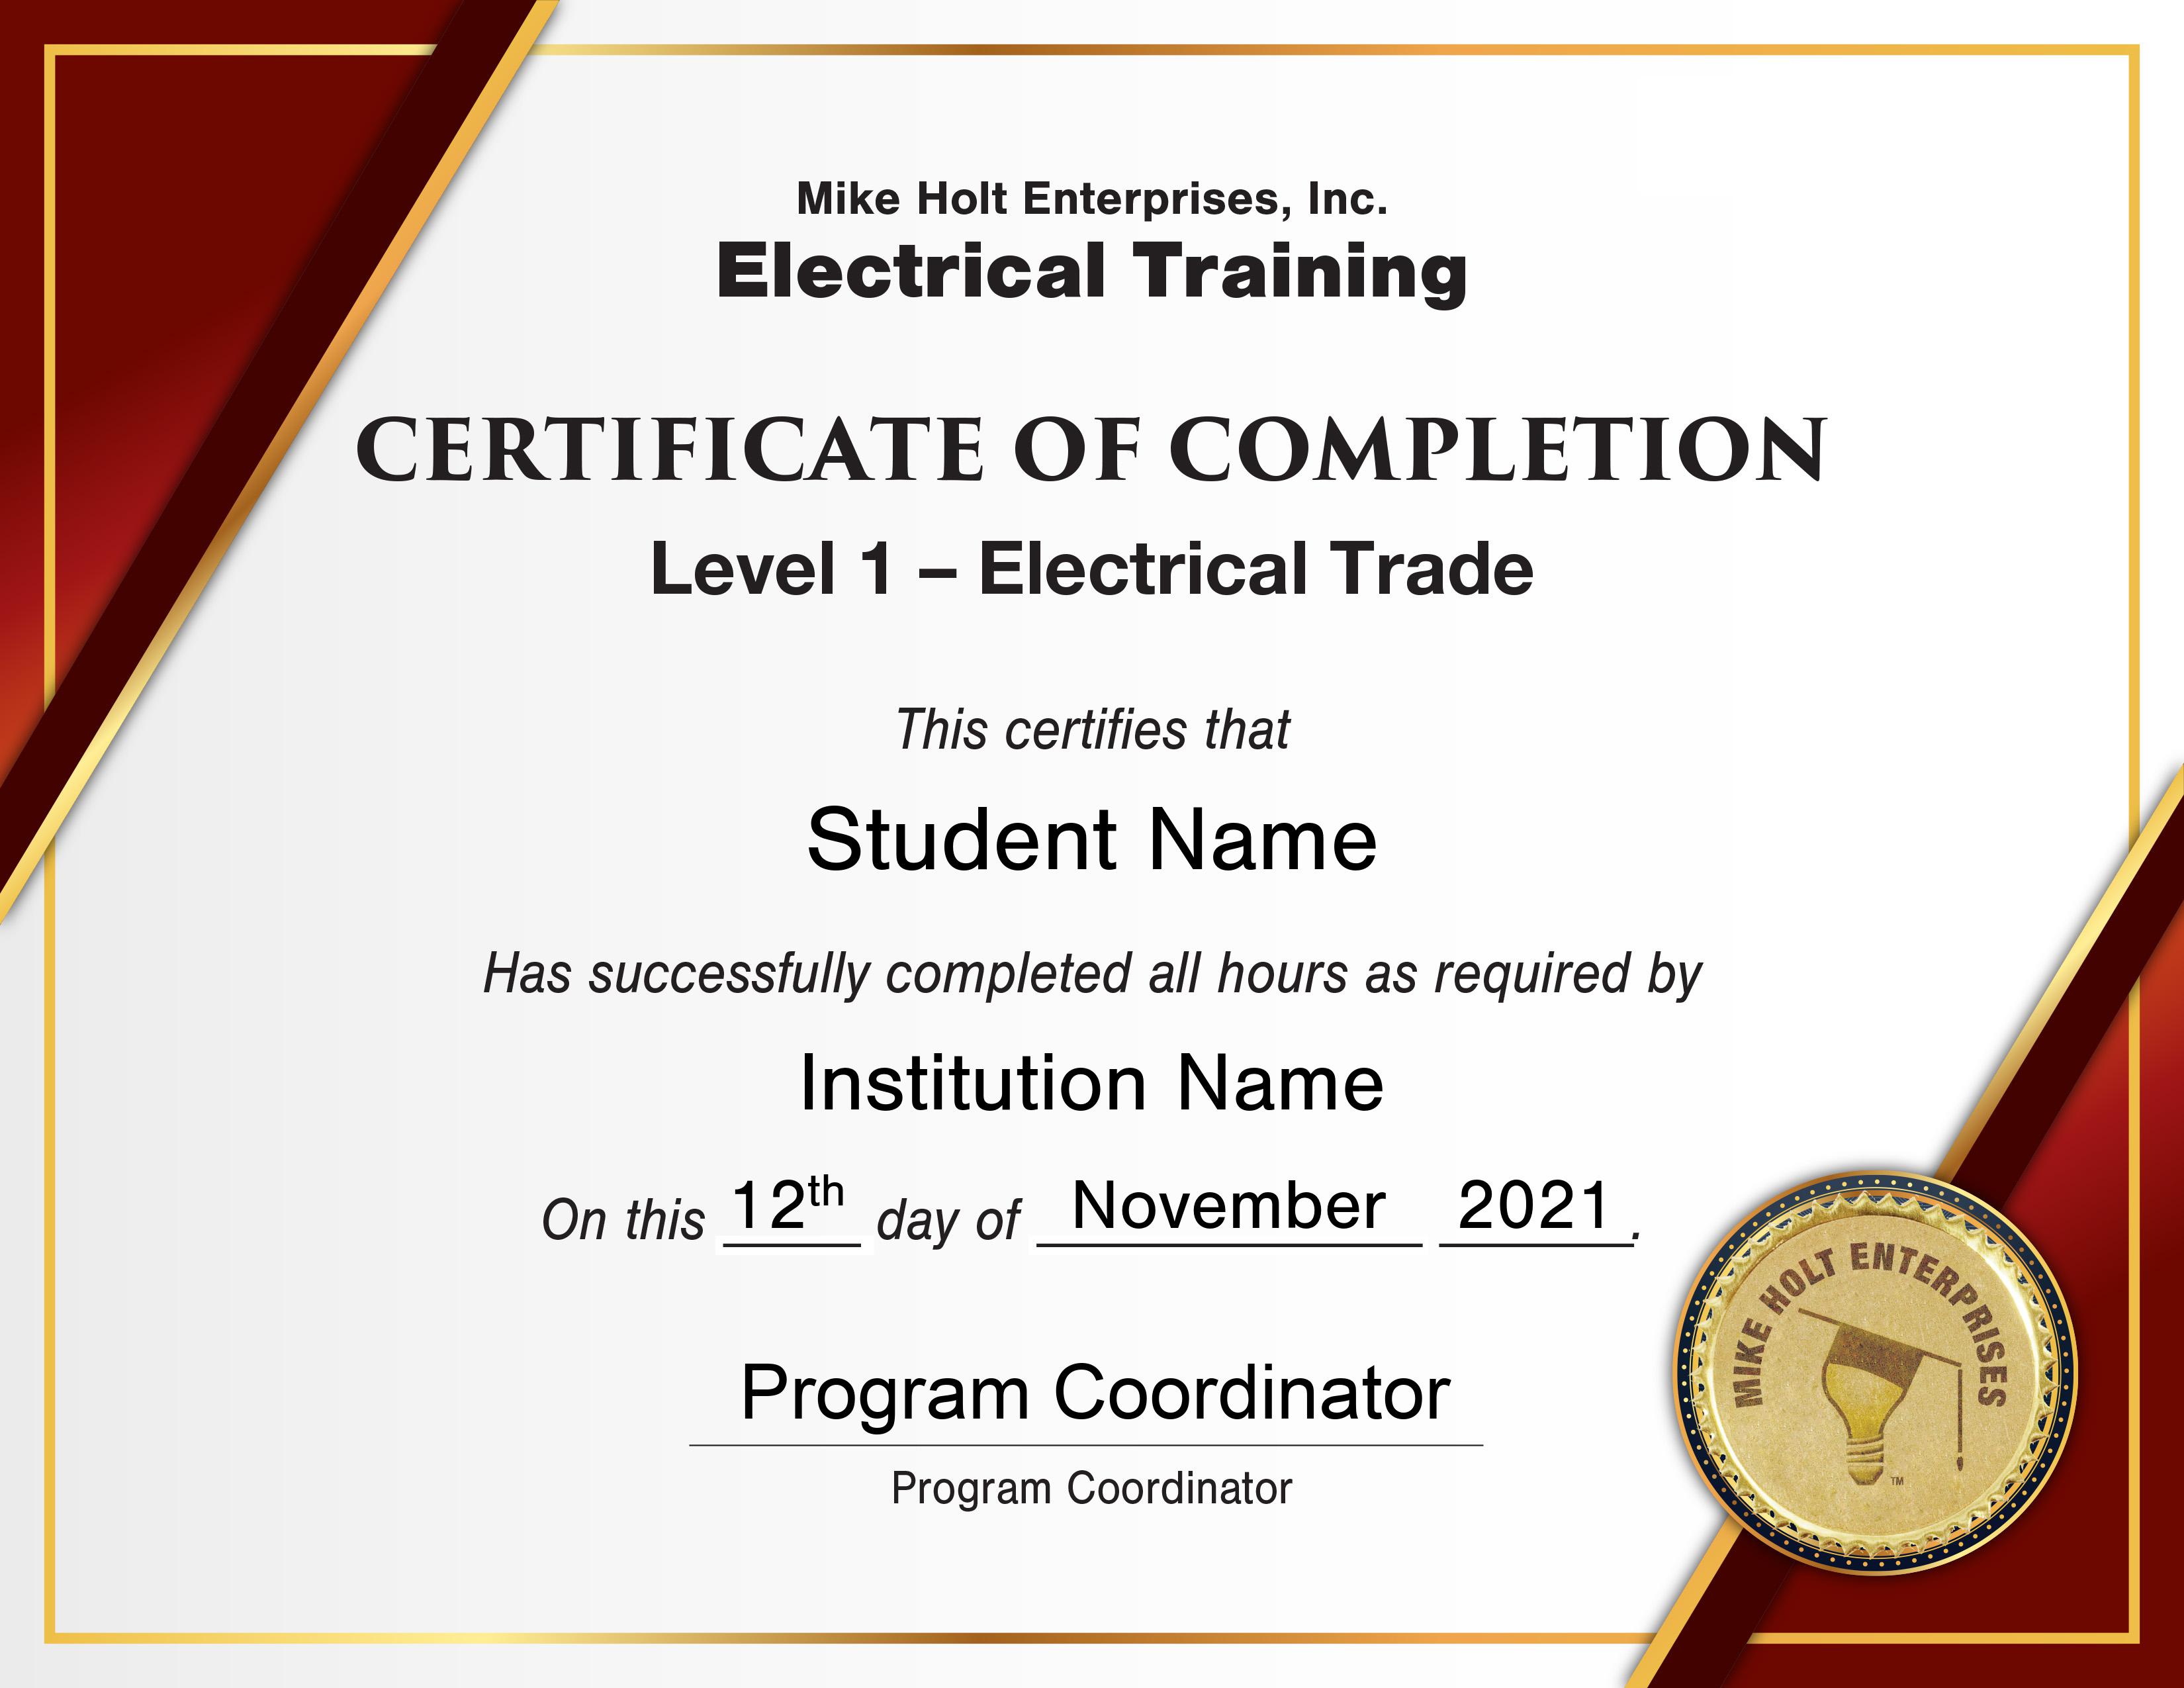 Certificate of Completion for Level 1